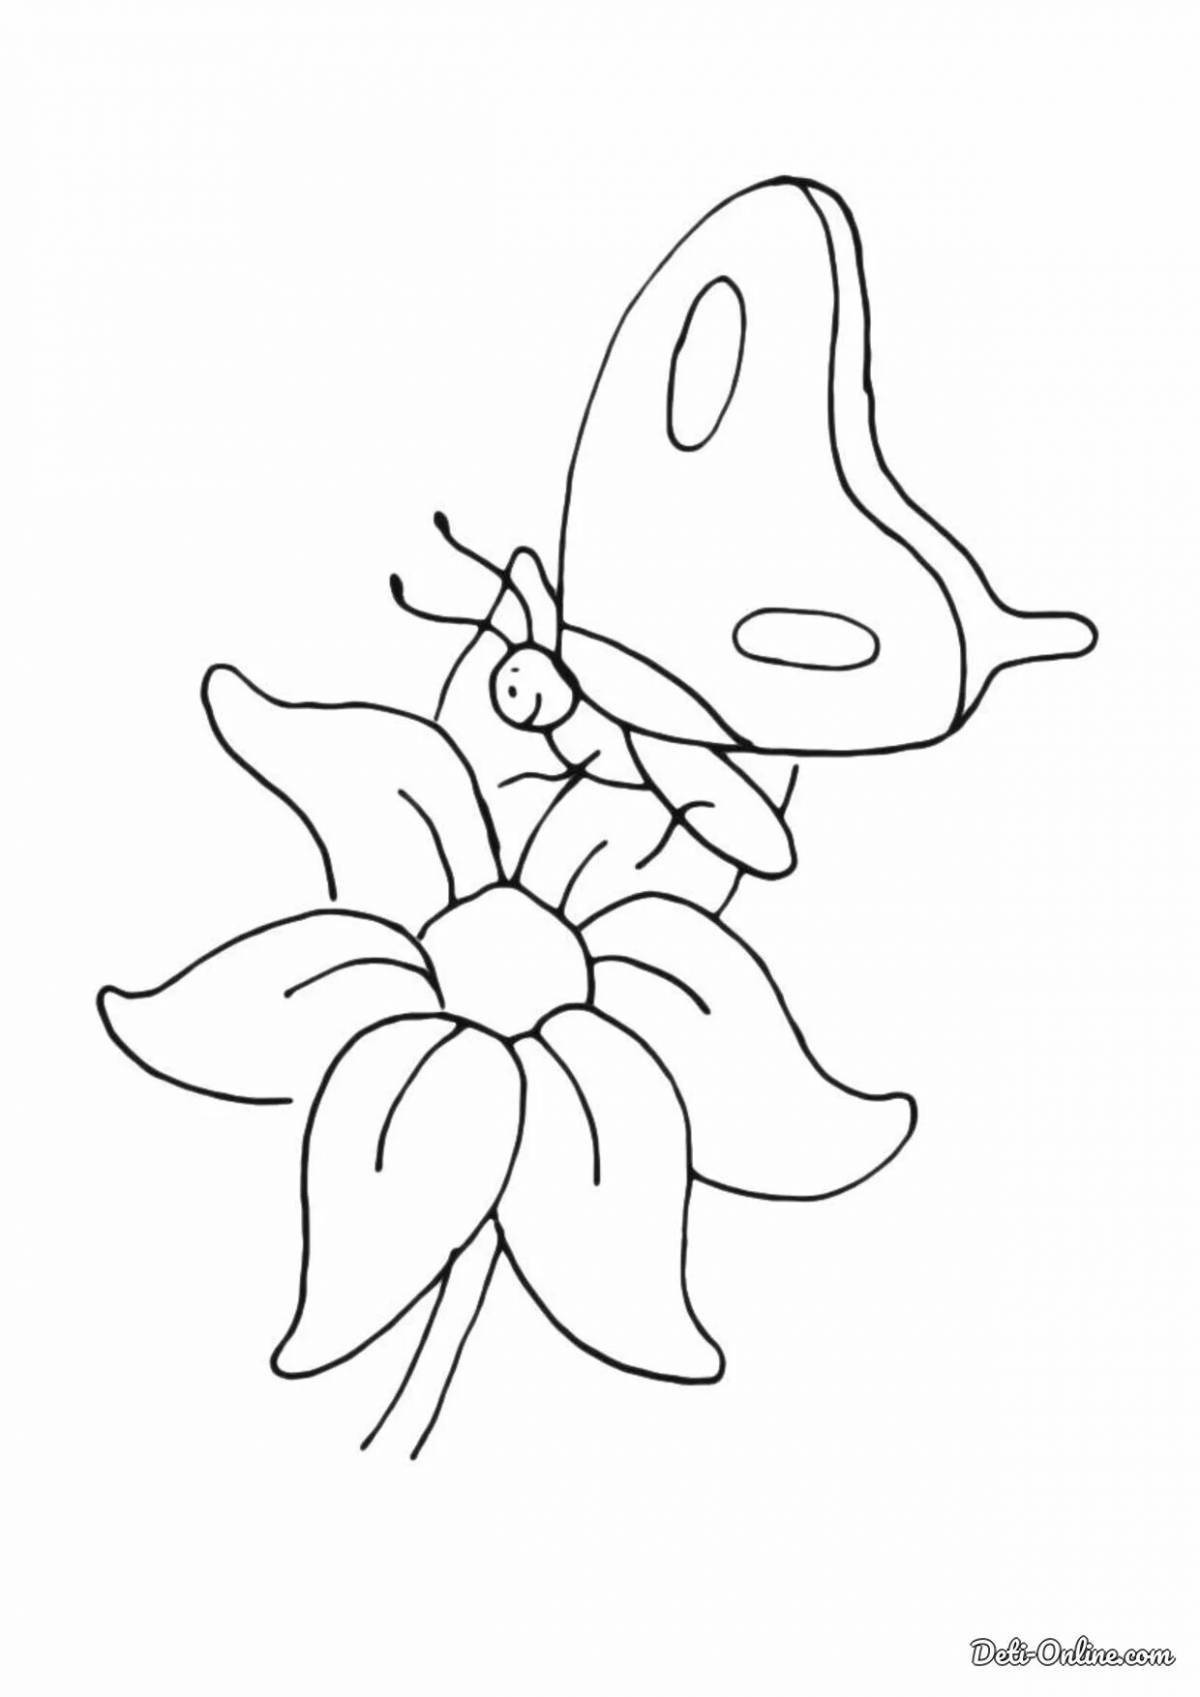 Coloring book shining butterfly with a flower